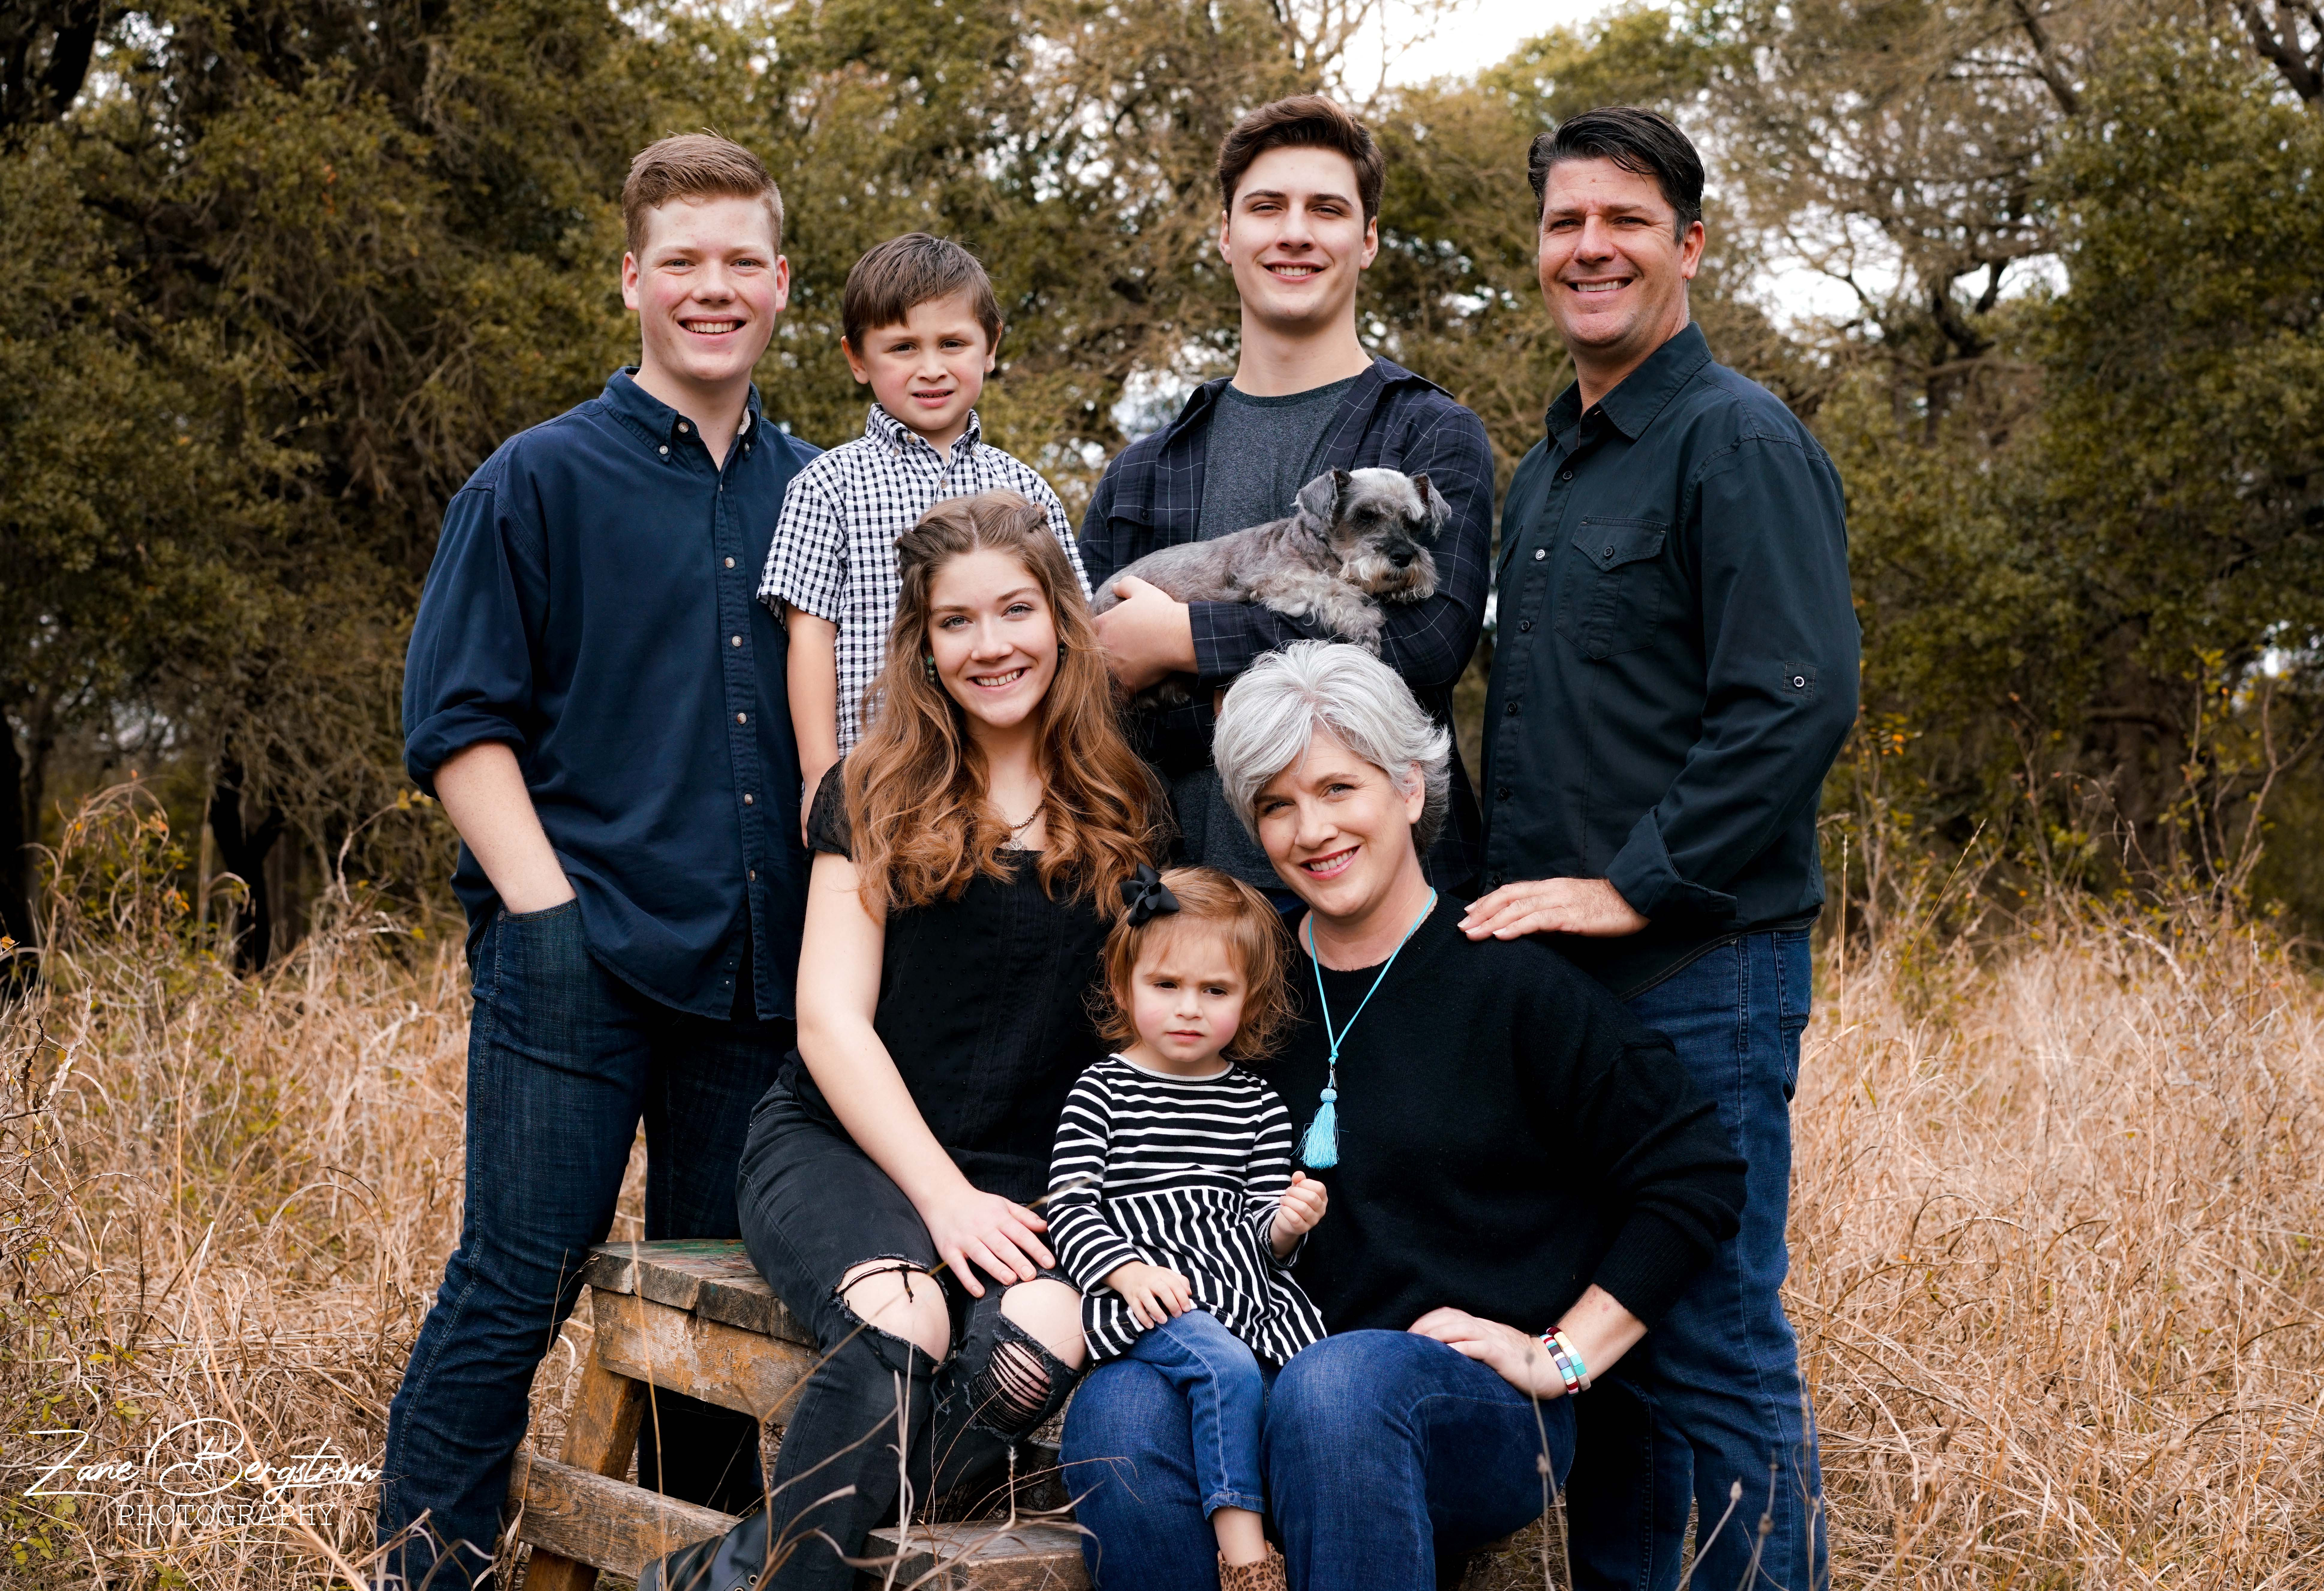 Image description: A family photo. Two adults and their five children are together outside smiling at the camera.